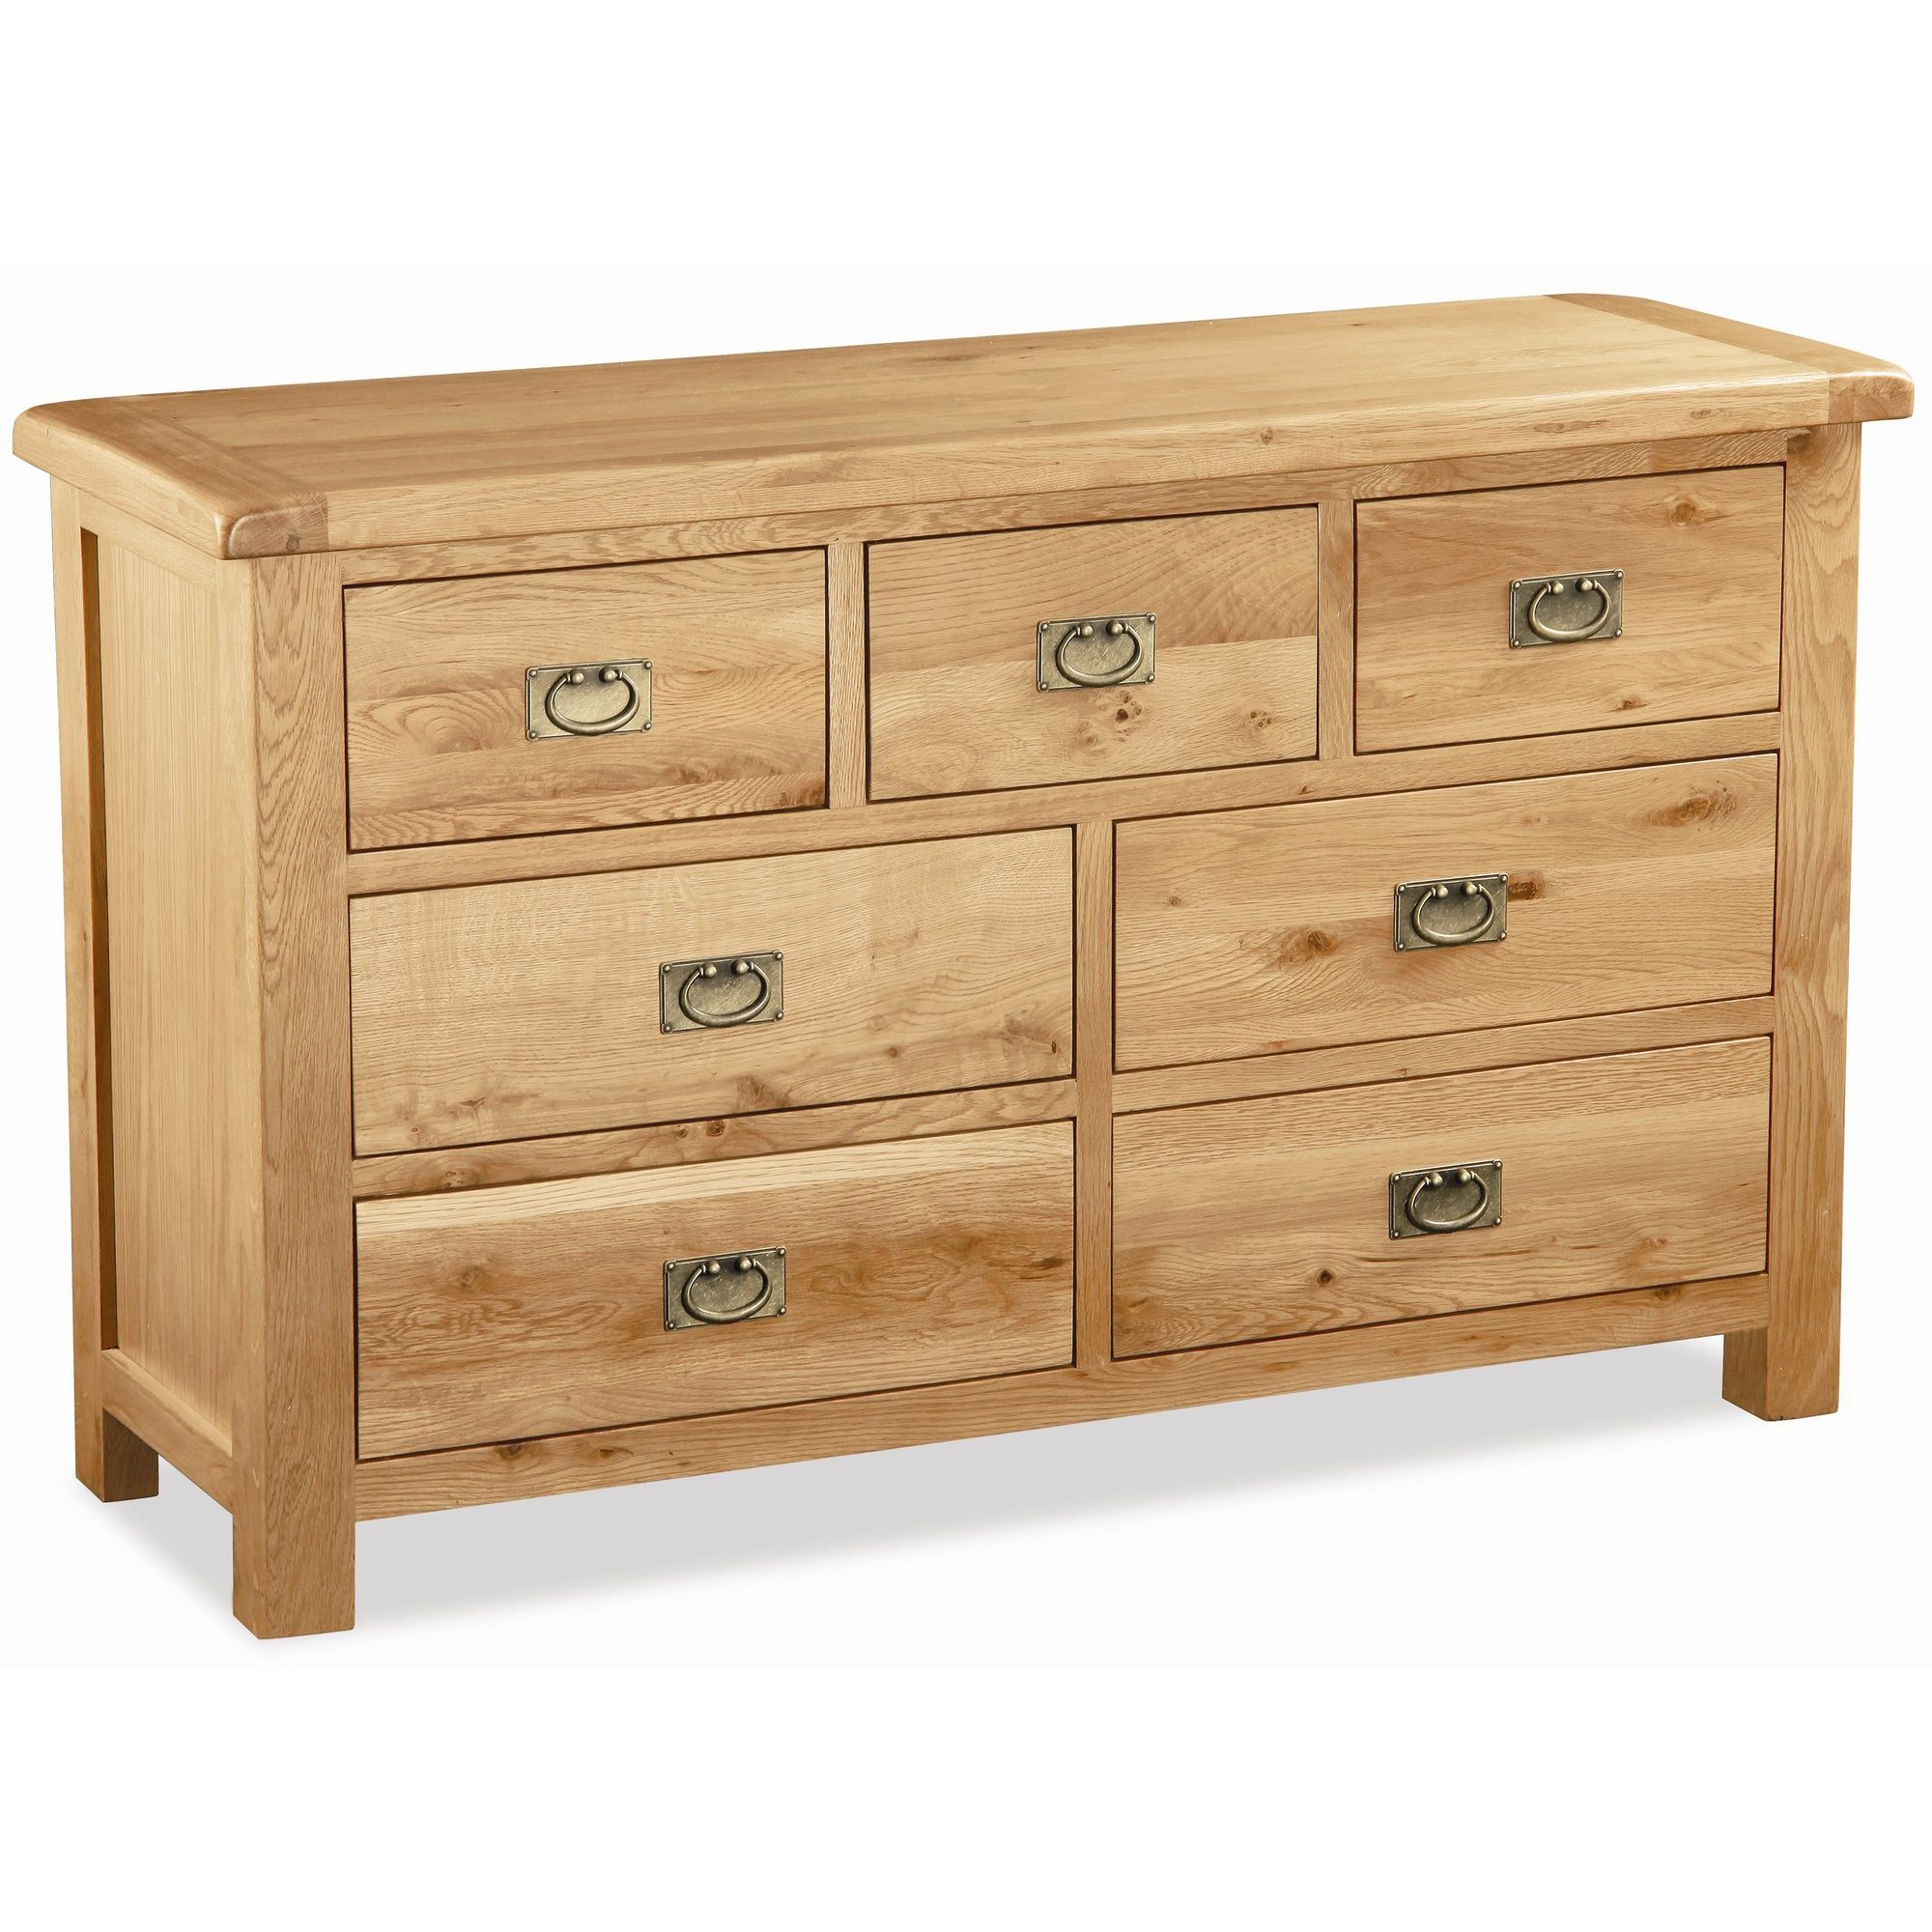 Alterton Furniture Pemberley 3 Over 4 Drawer Chest at Tesco Direct